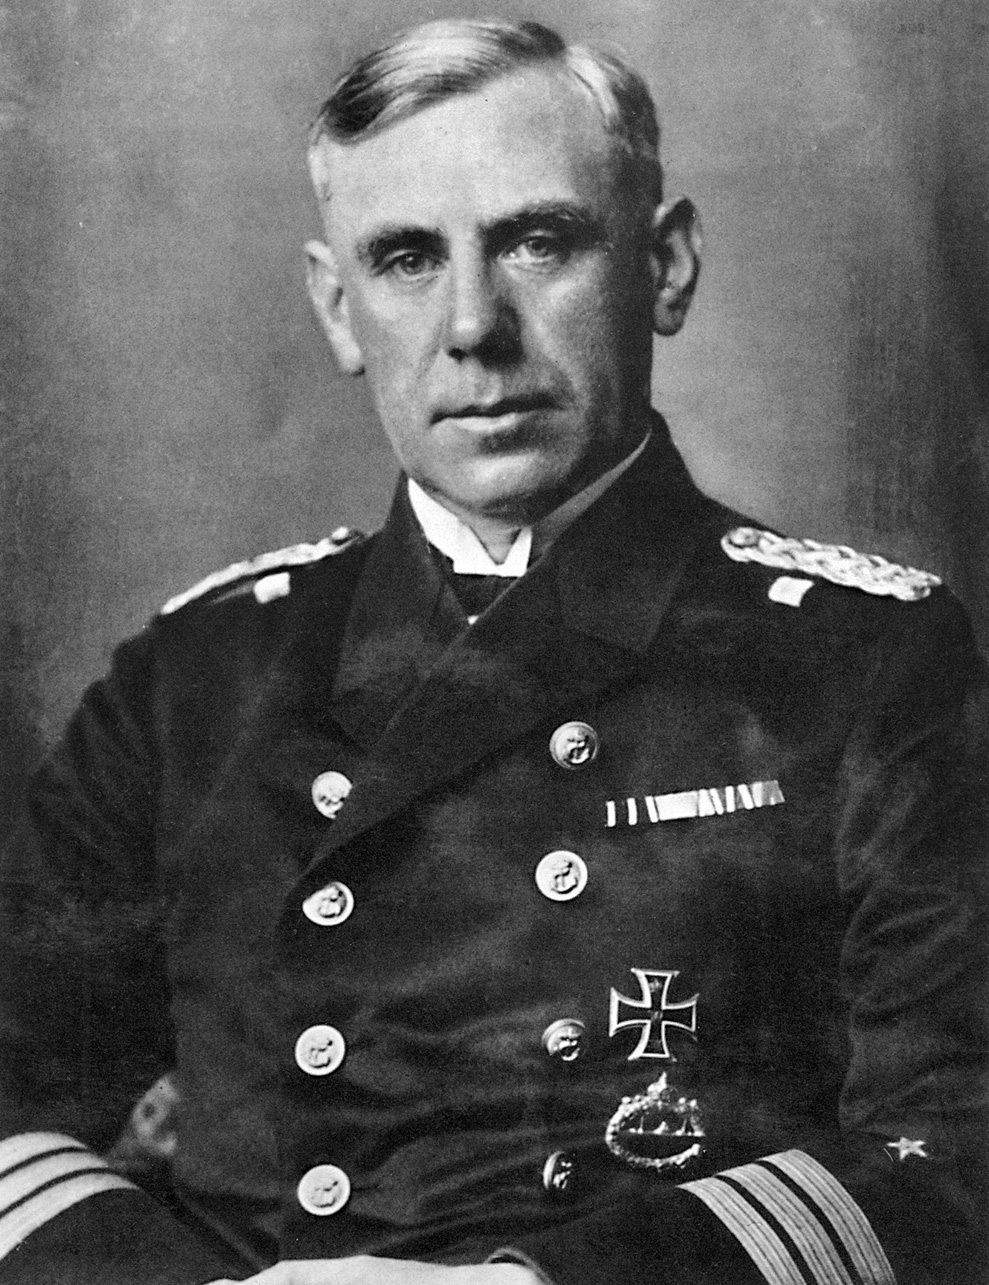 Canaris as a naval officer before the outbreak of World War II. His appointment in 1935 to head the Abwehr came as a huge surprise to him given that he had extremely limited experience in that area of operations.